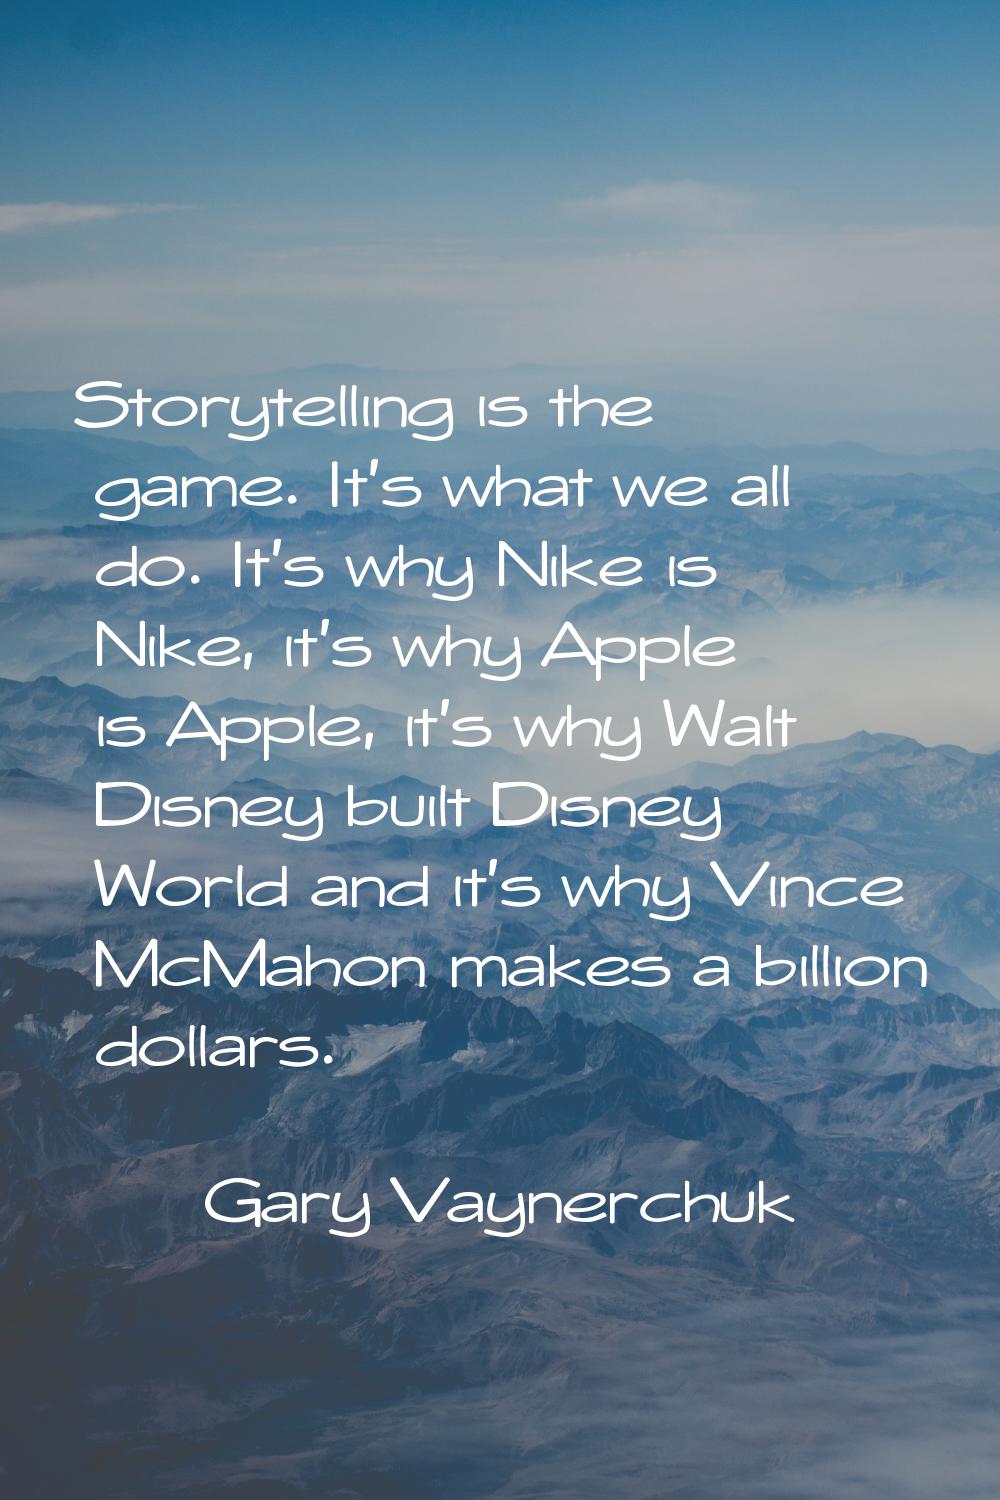 Storytelling is the game. It's what we all do. It's why Nike is Nike, it's why Apple is Apple, it's